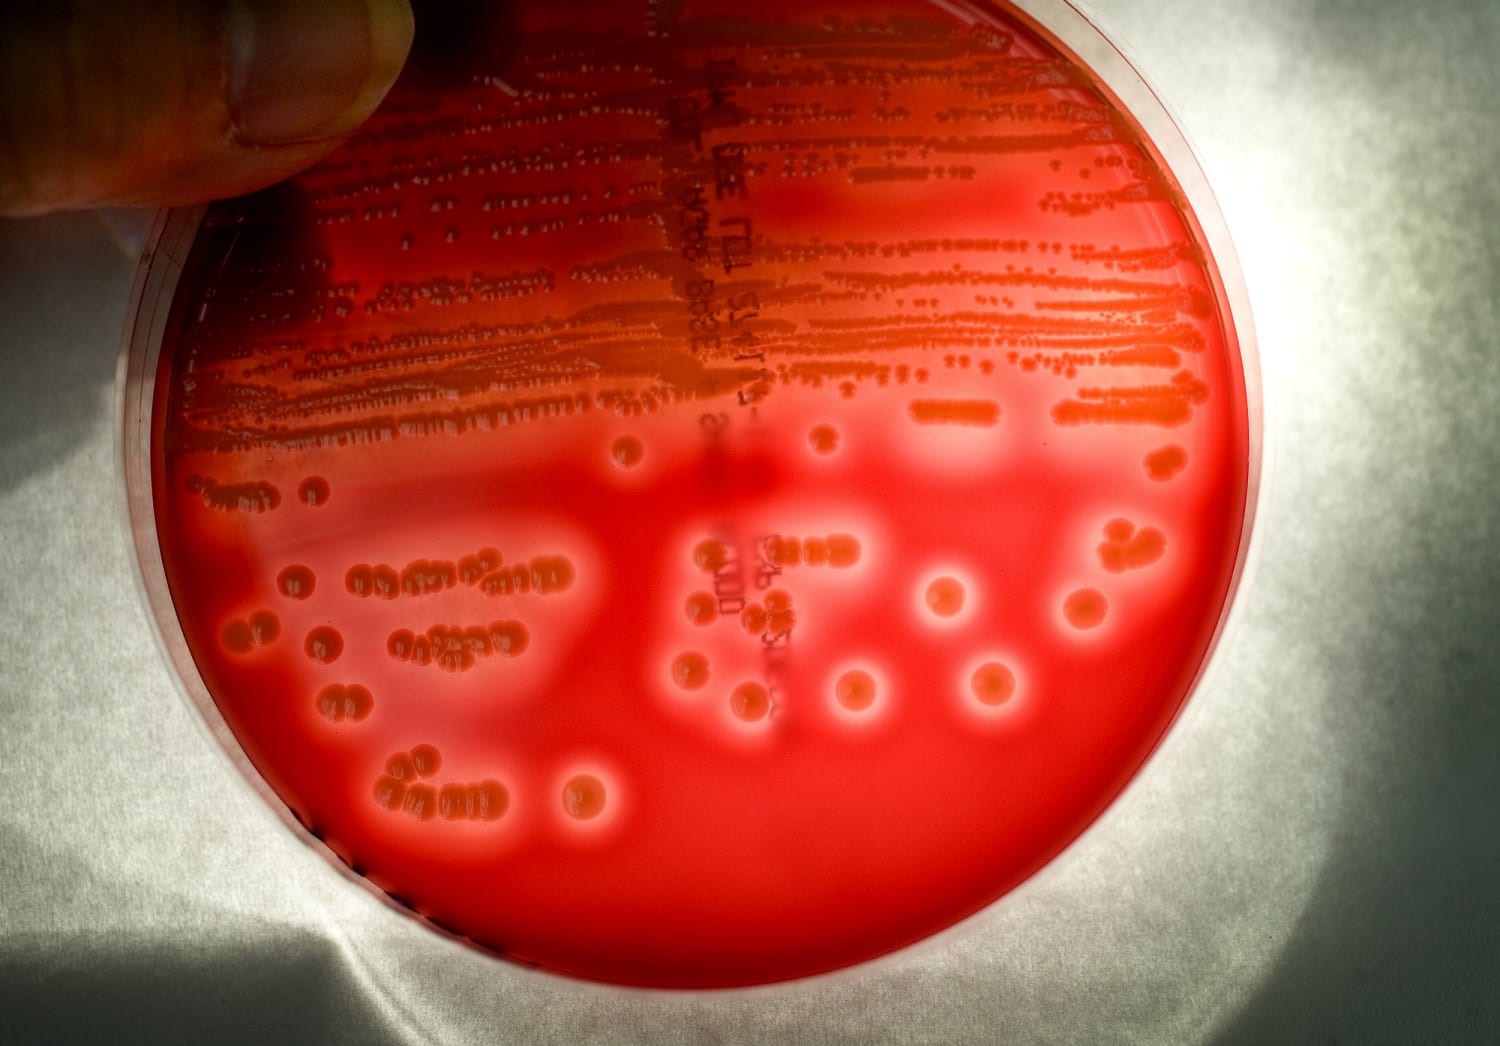 Staphylococcus: From Harmless Skin Bacteria to Deadly Pathogen